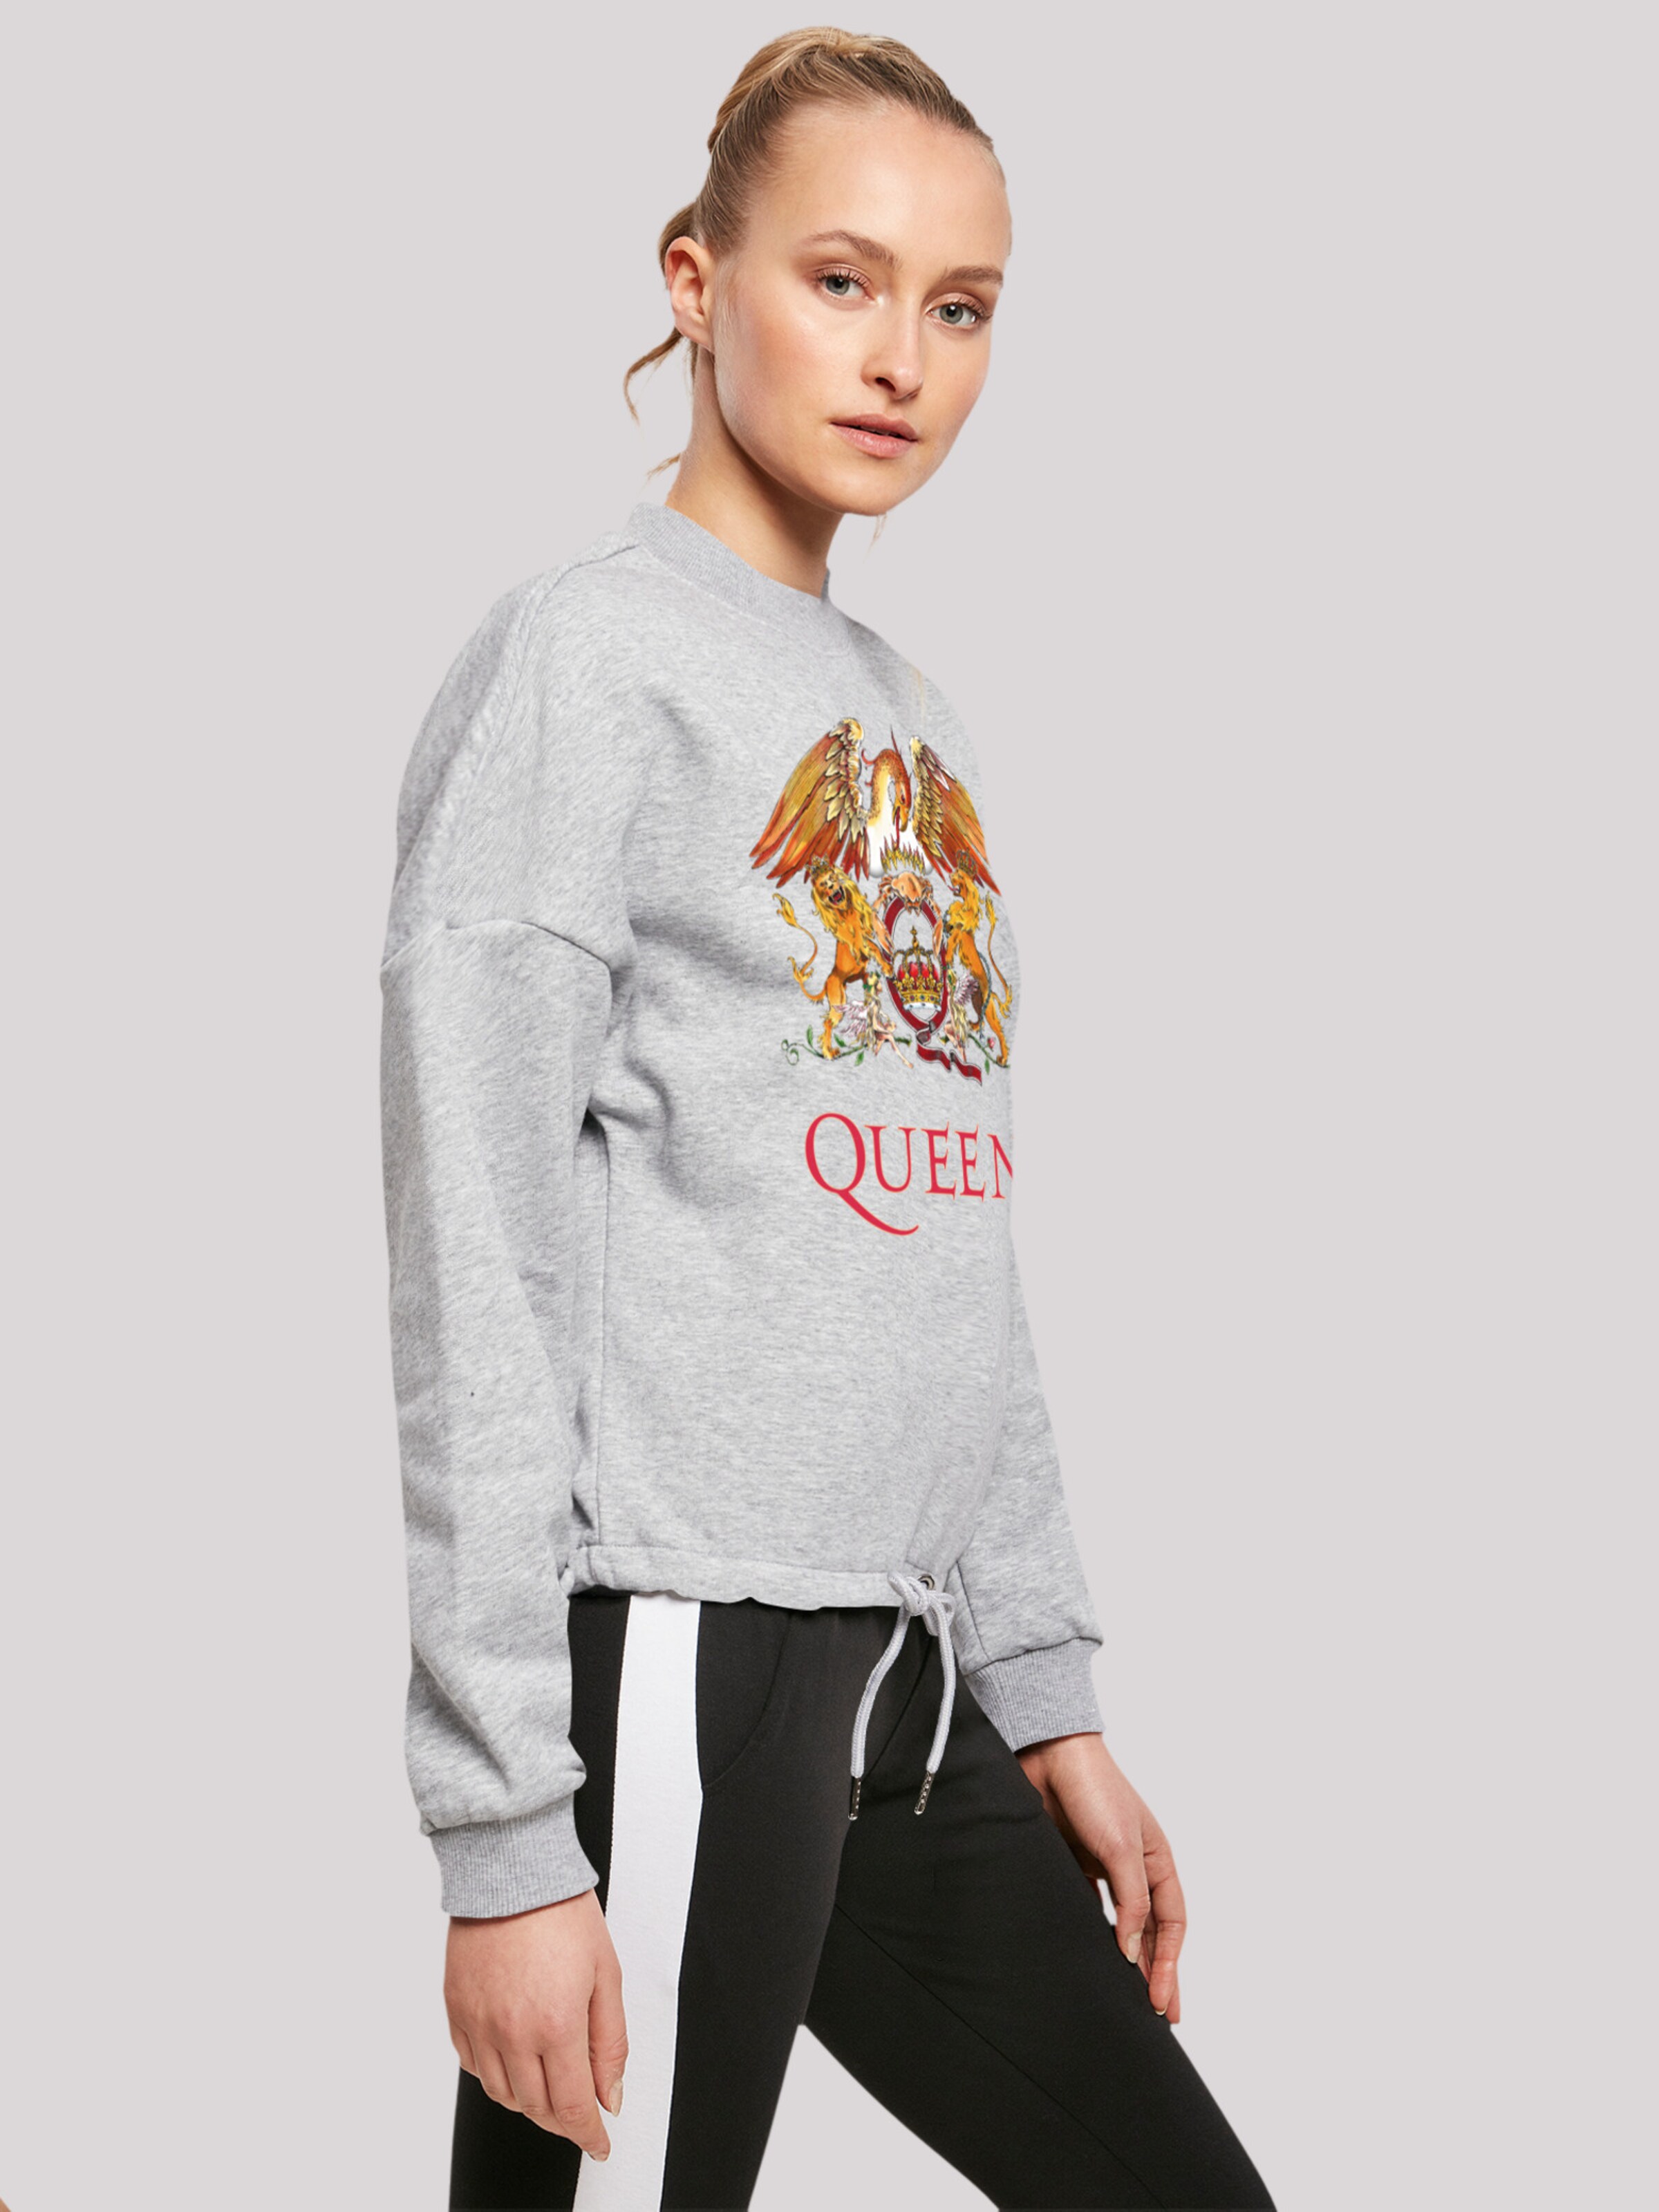 | \'Queen Grey YOU Classic Crest\' ABOUT Sweatshirt F4NT4STIC in